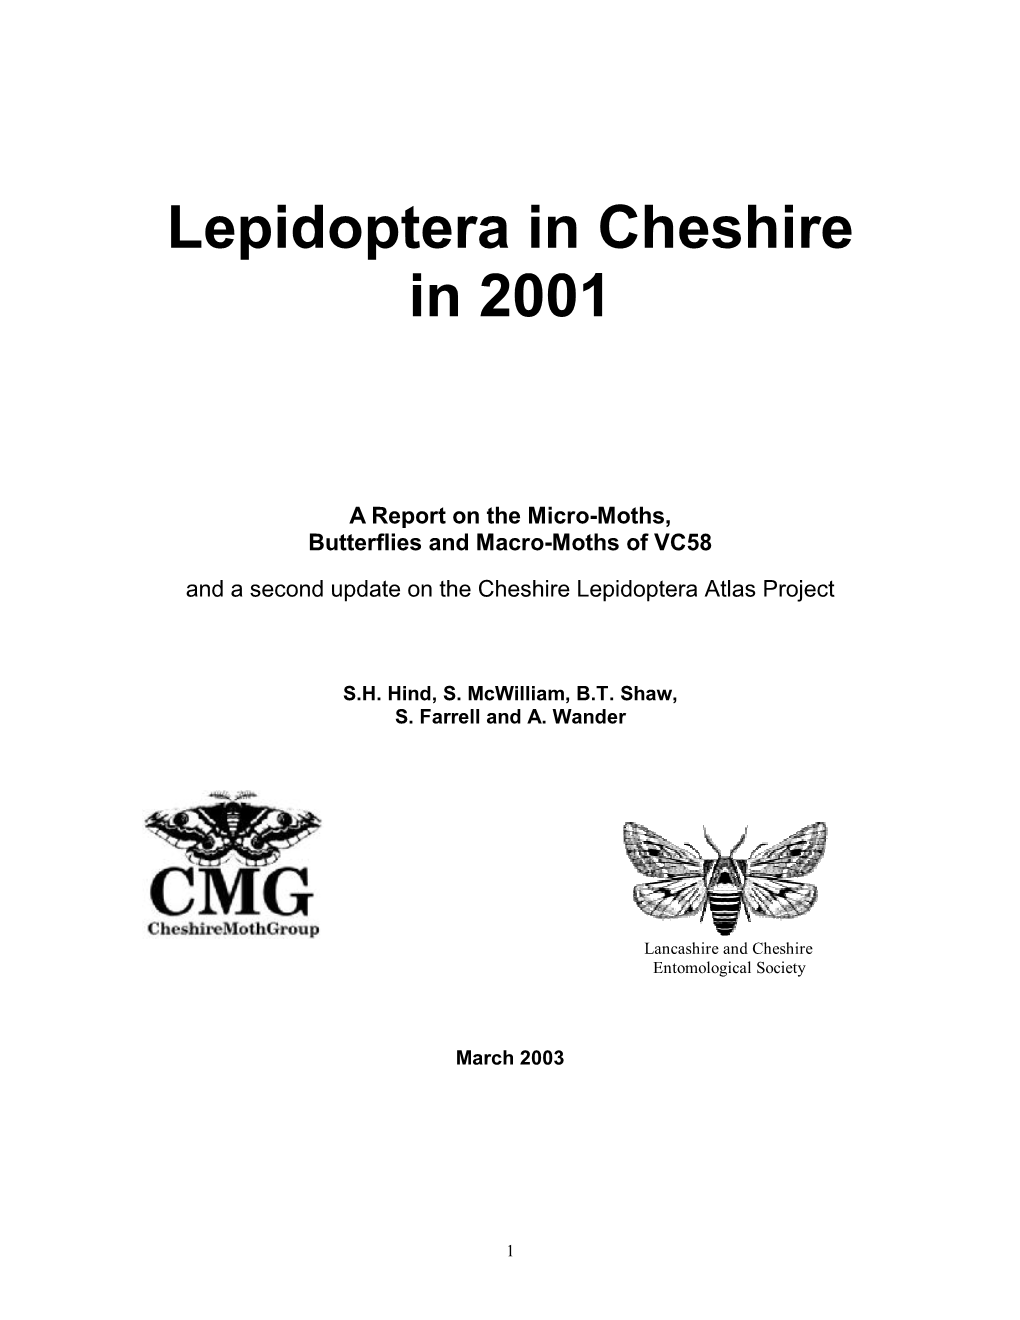 Lepidoptera in Cheshire in 2001